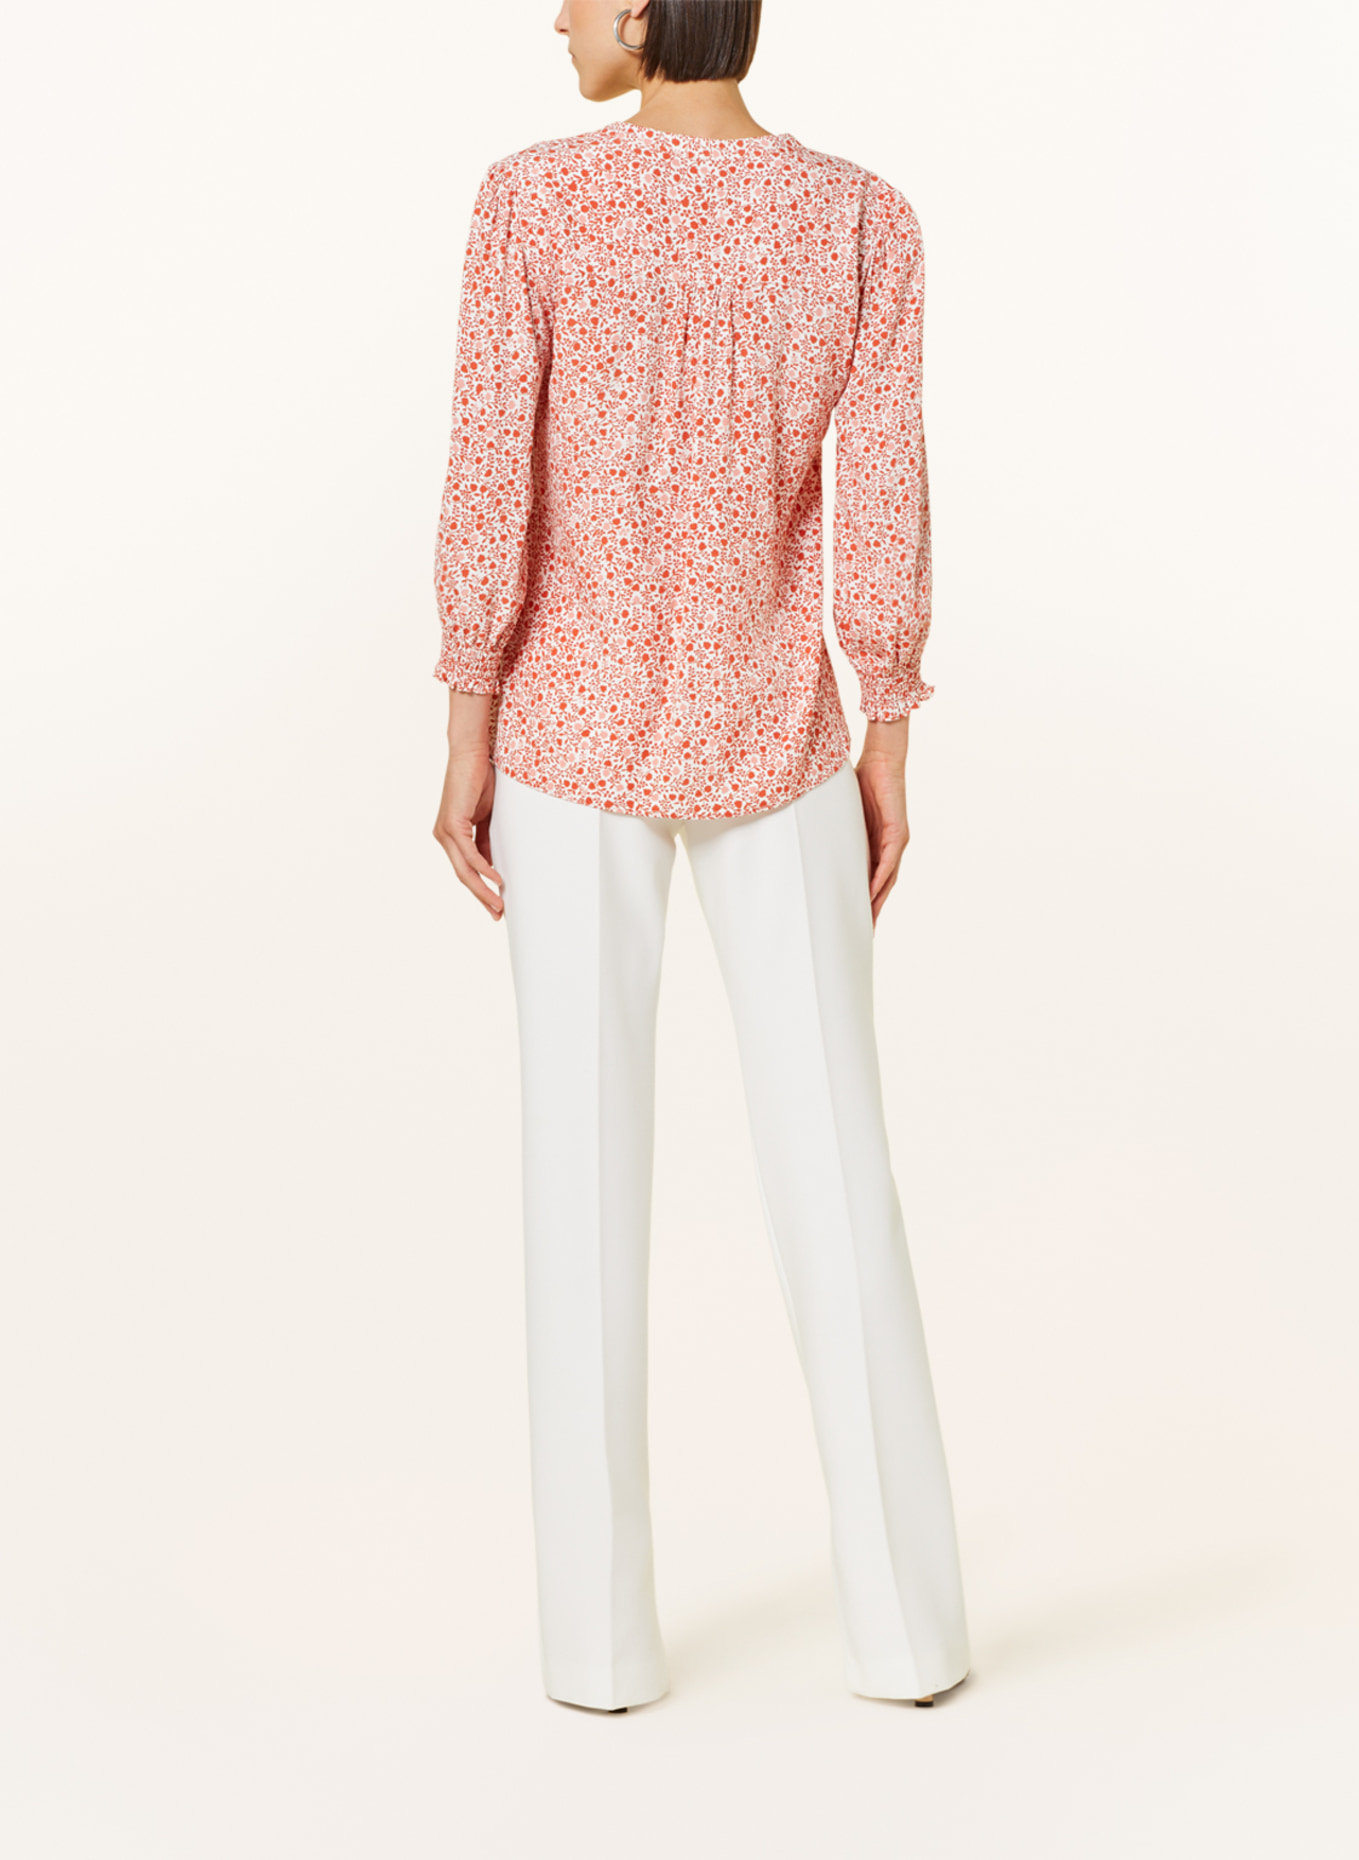 HOBBS Shirt blouse CECILIA with 3/4 sleeves in light red/ cream